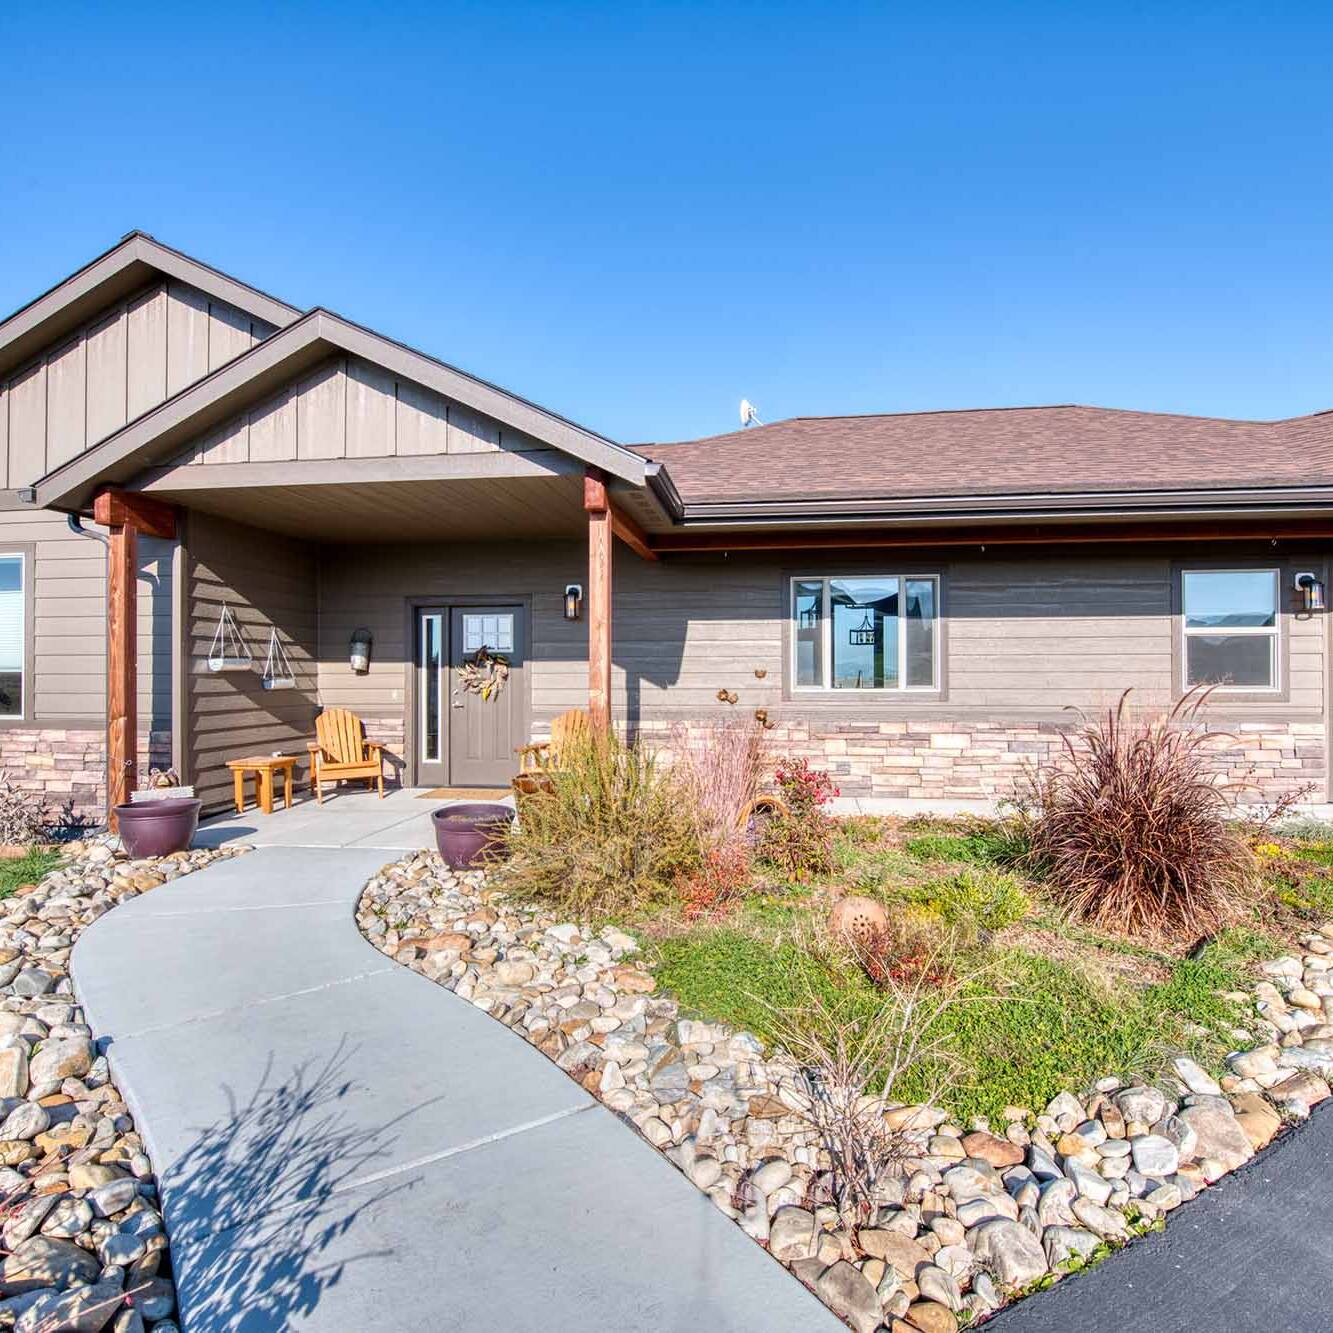 Front exterior & entry porch of The Copper Creek model home - Built by Big Sky Builder in Florence, MT